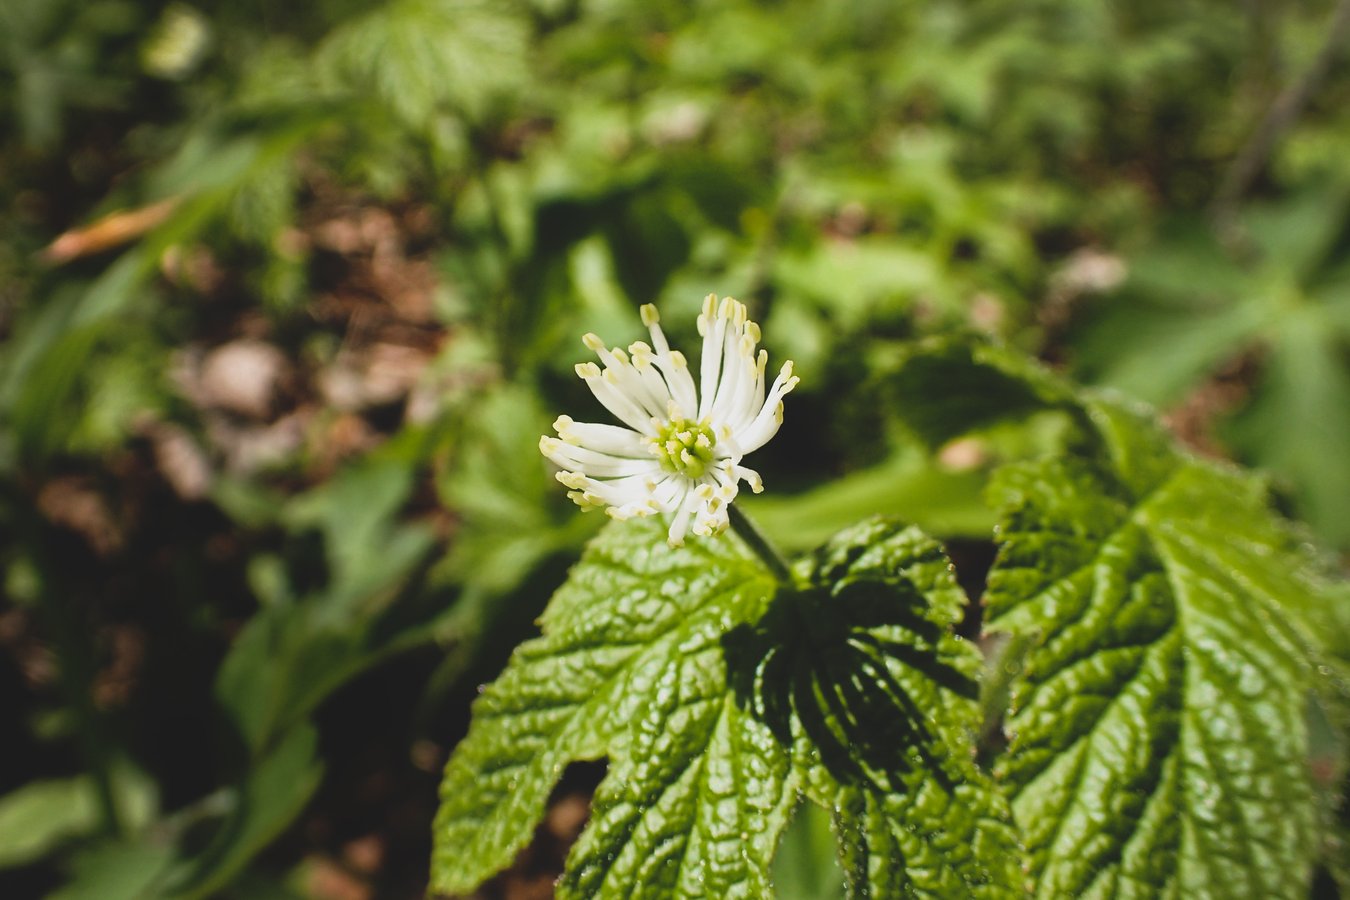 A goldenseal plant in bloom